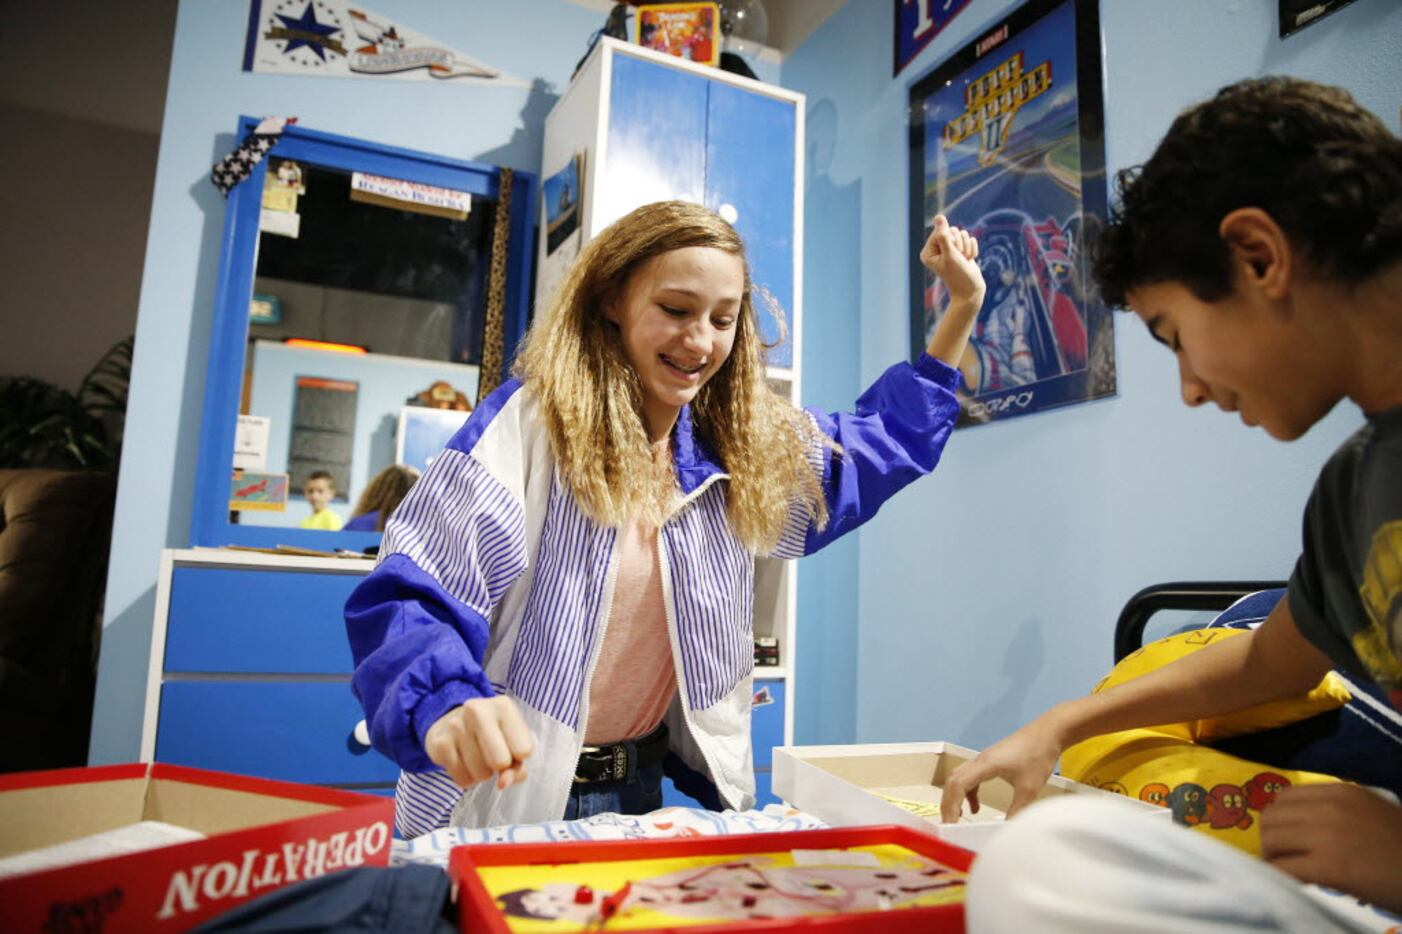 Kennedy Kellen, 14, cheers while playing "Operation" with Adrian Rivera, 13, both of Frisco,...